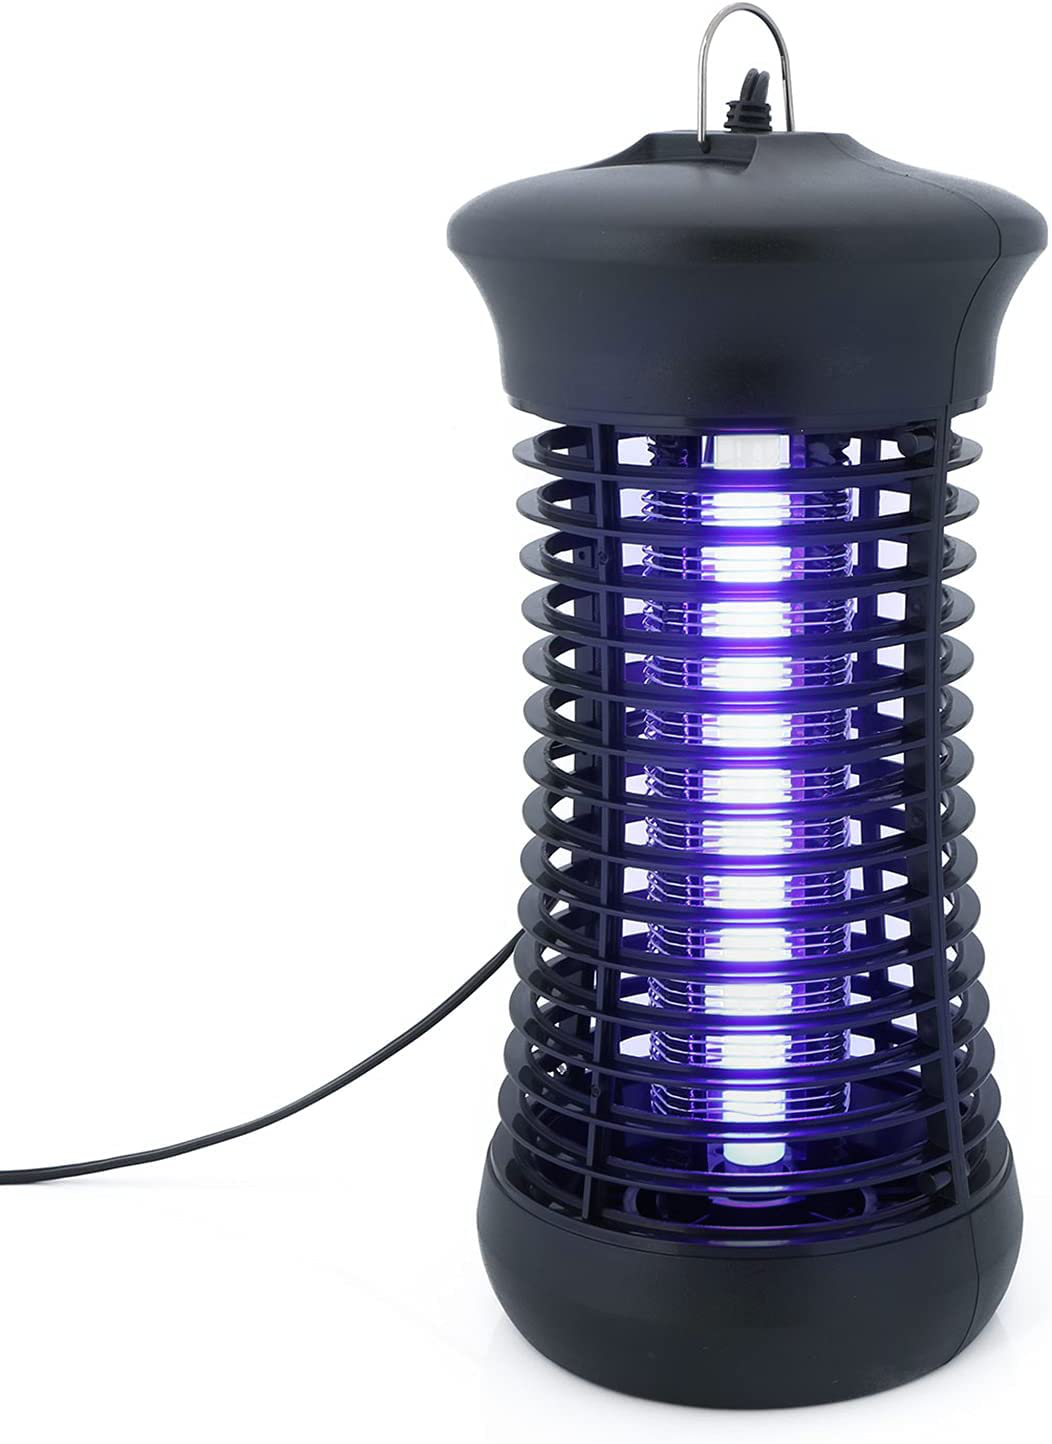 U.S. Solid Electric Bug Zapper Mosquito Killer for Indoor Wide Coverage Protection, 6W Powerful Flying Insects Trap with 1200V High Voltage Electric Grid for Bedroom, Living Room, Kitchen